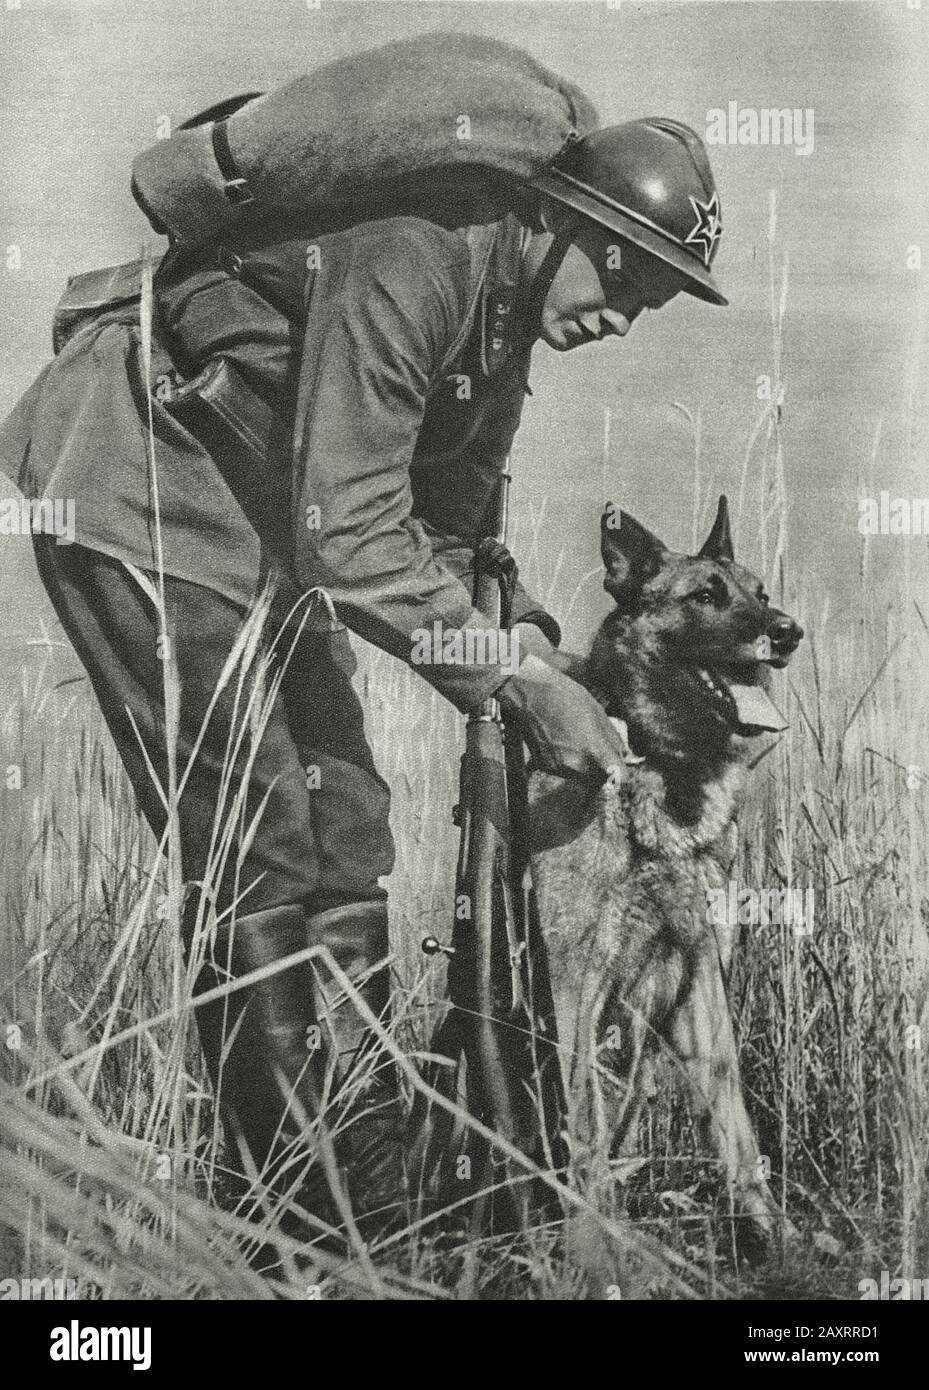 Red Army in 1930s. From soviet propaganda book of 1937. Signalman with a dog Stock Photo